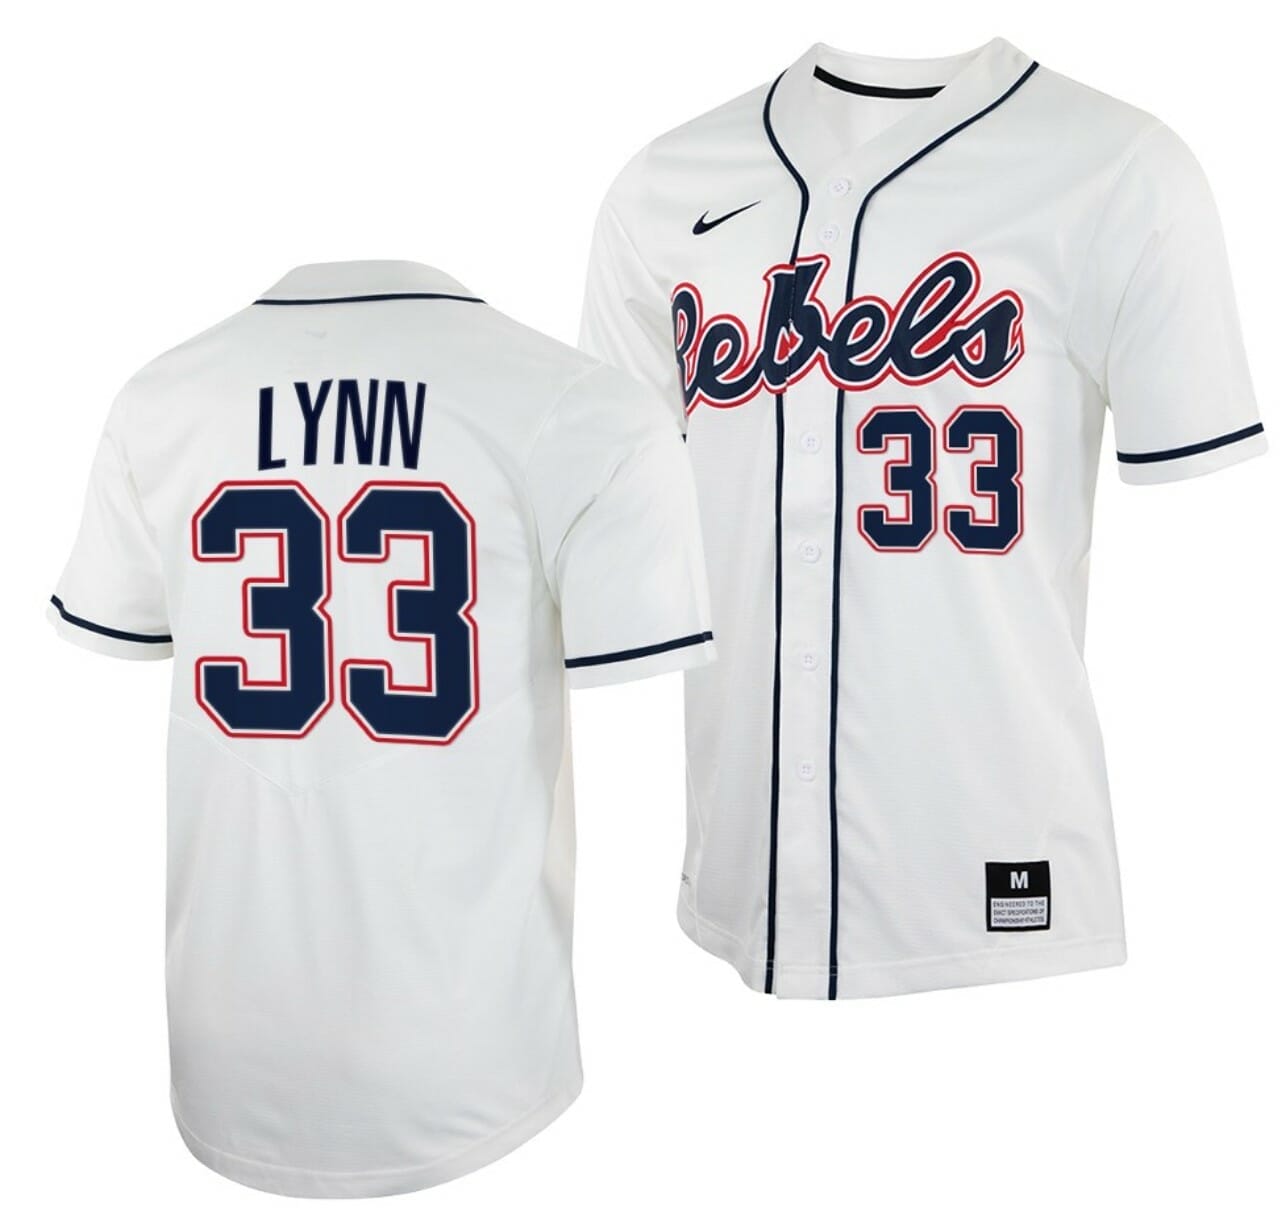 Available] Get New Lance Lynn Jersey White #33